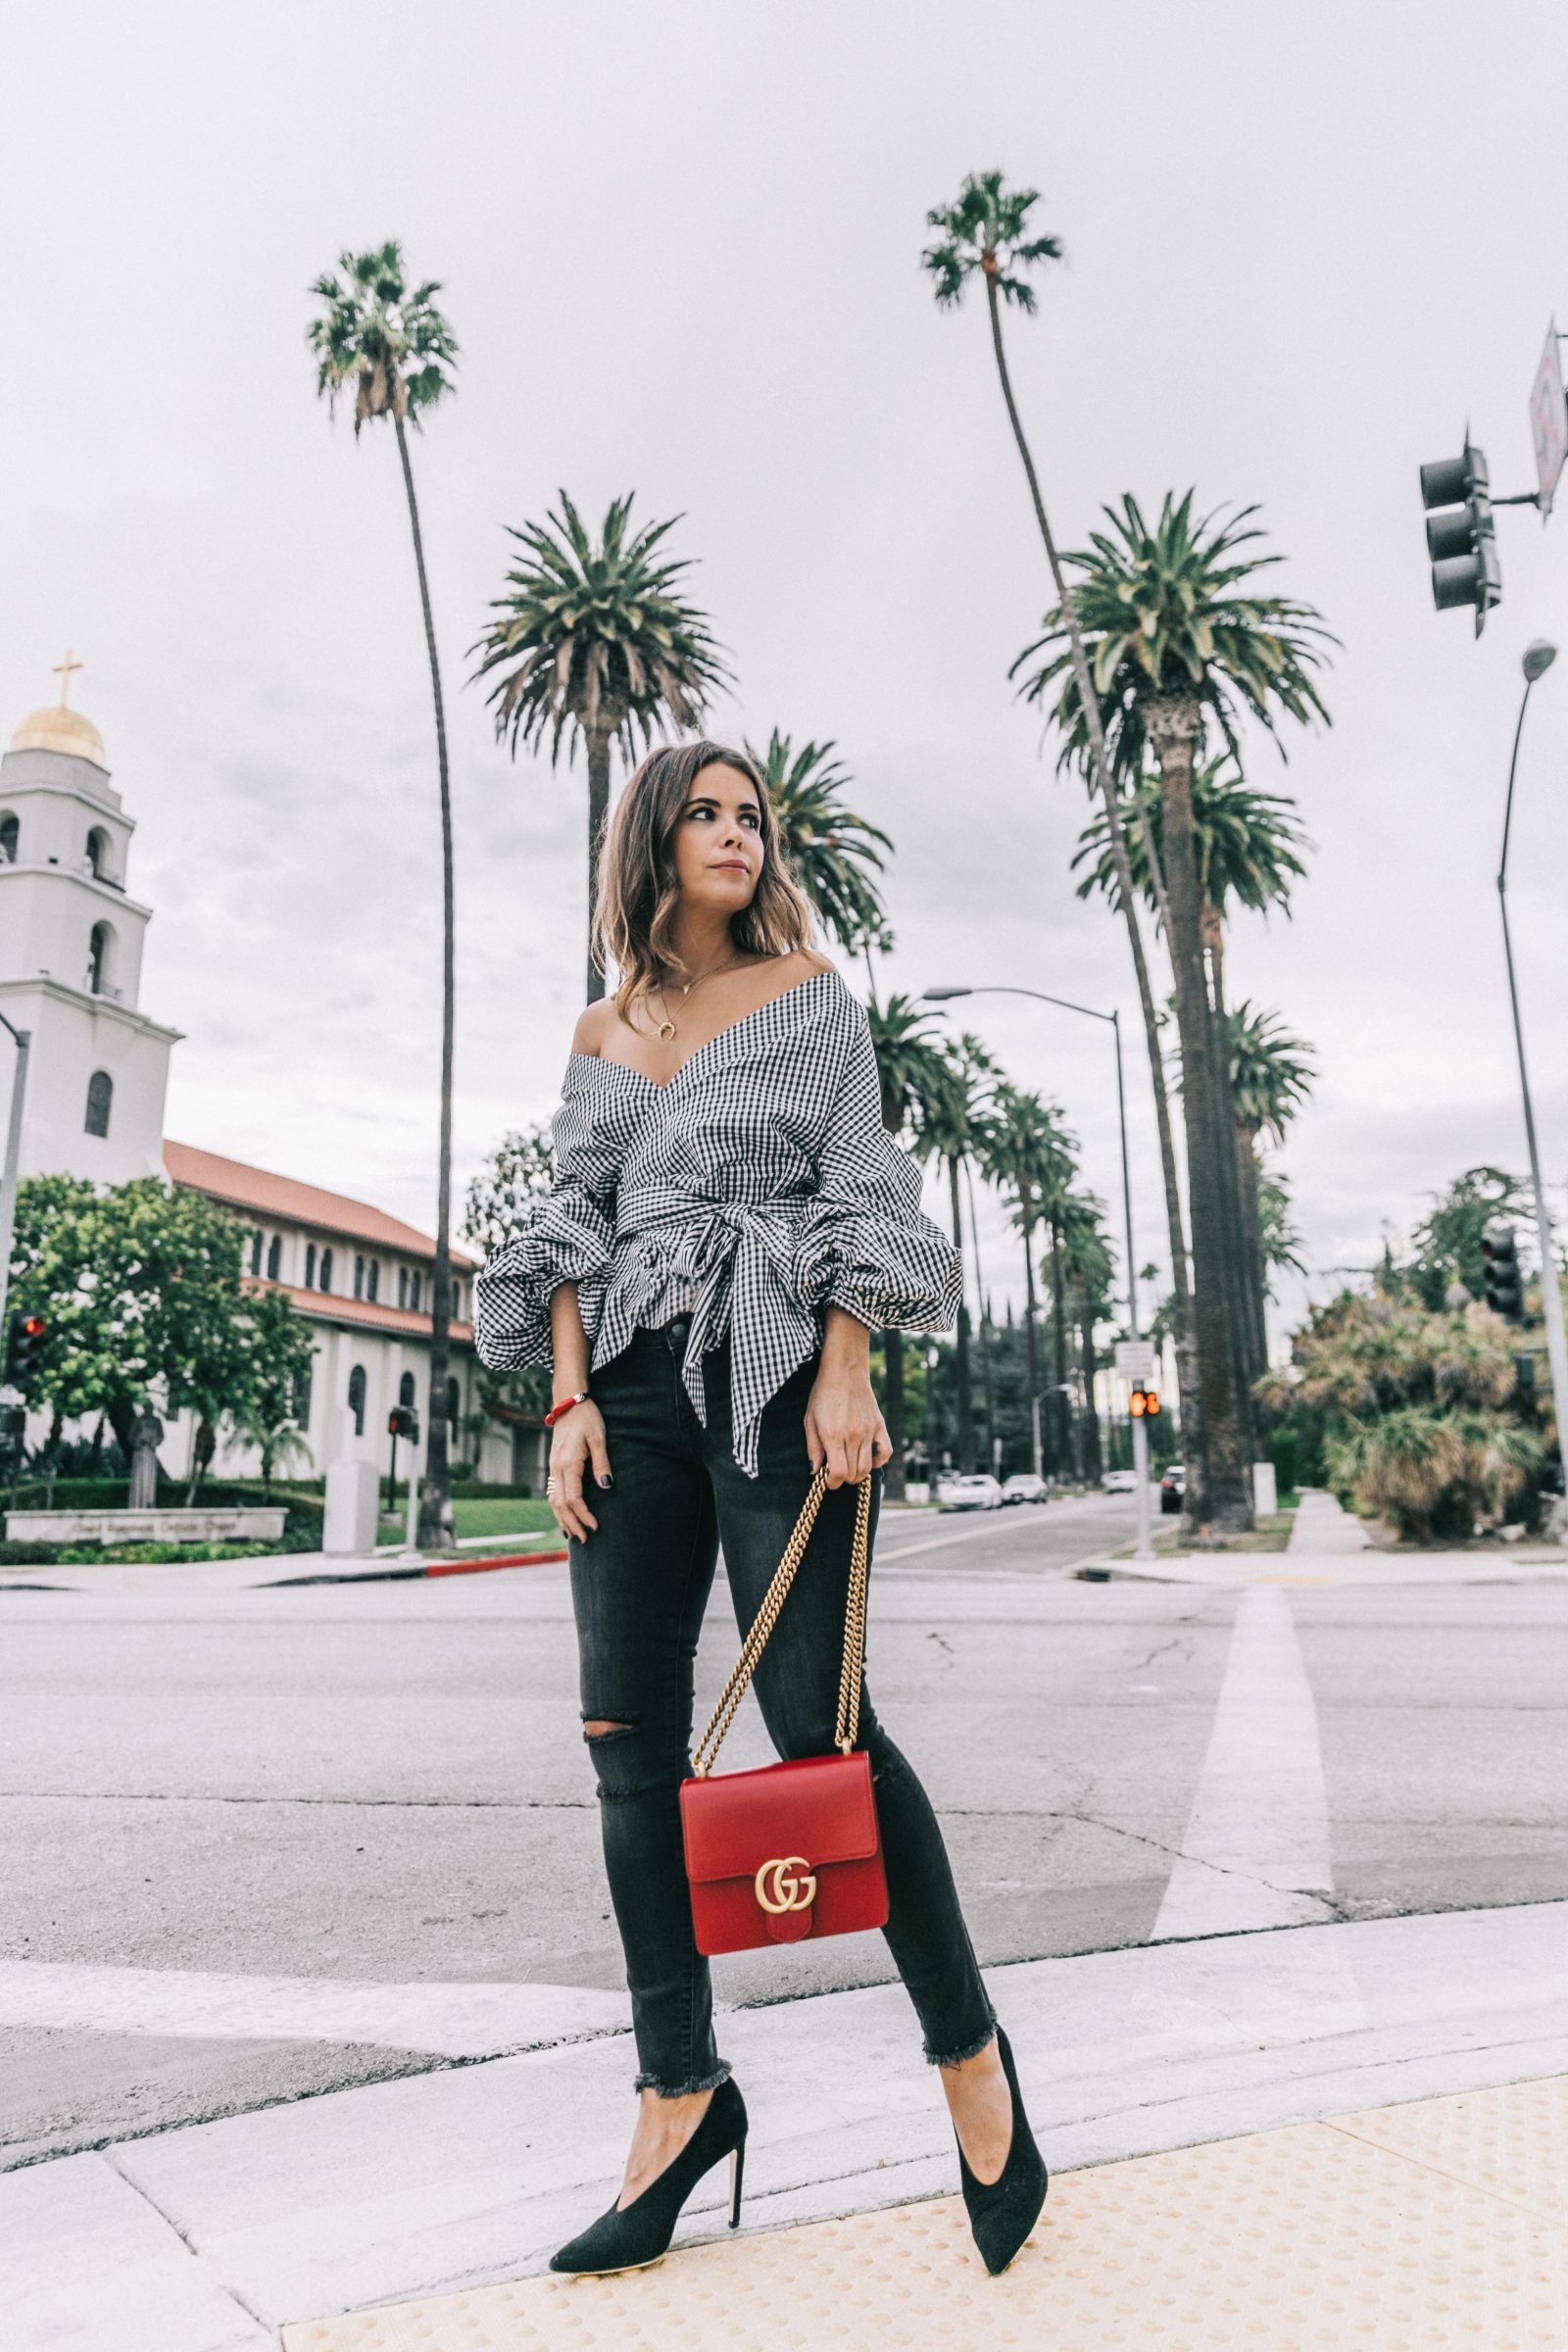 beverly_hills-off_the_shoulders_shirt-plaid-skinny_jeans-ripped_jeans-sincerely_jules_shop-gucci_bag-chicwish-outfit-street_style-los_angeles-collage_vintage-40